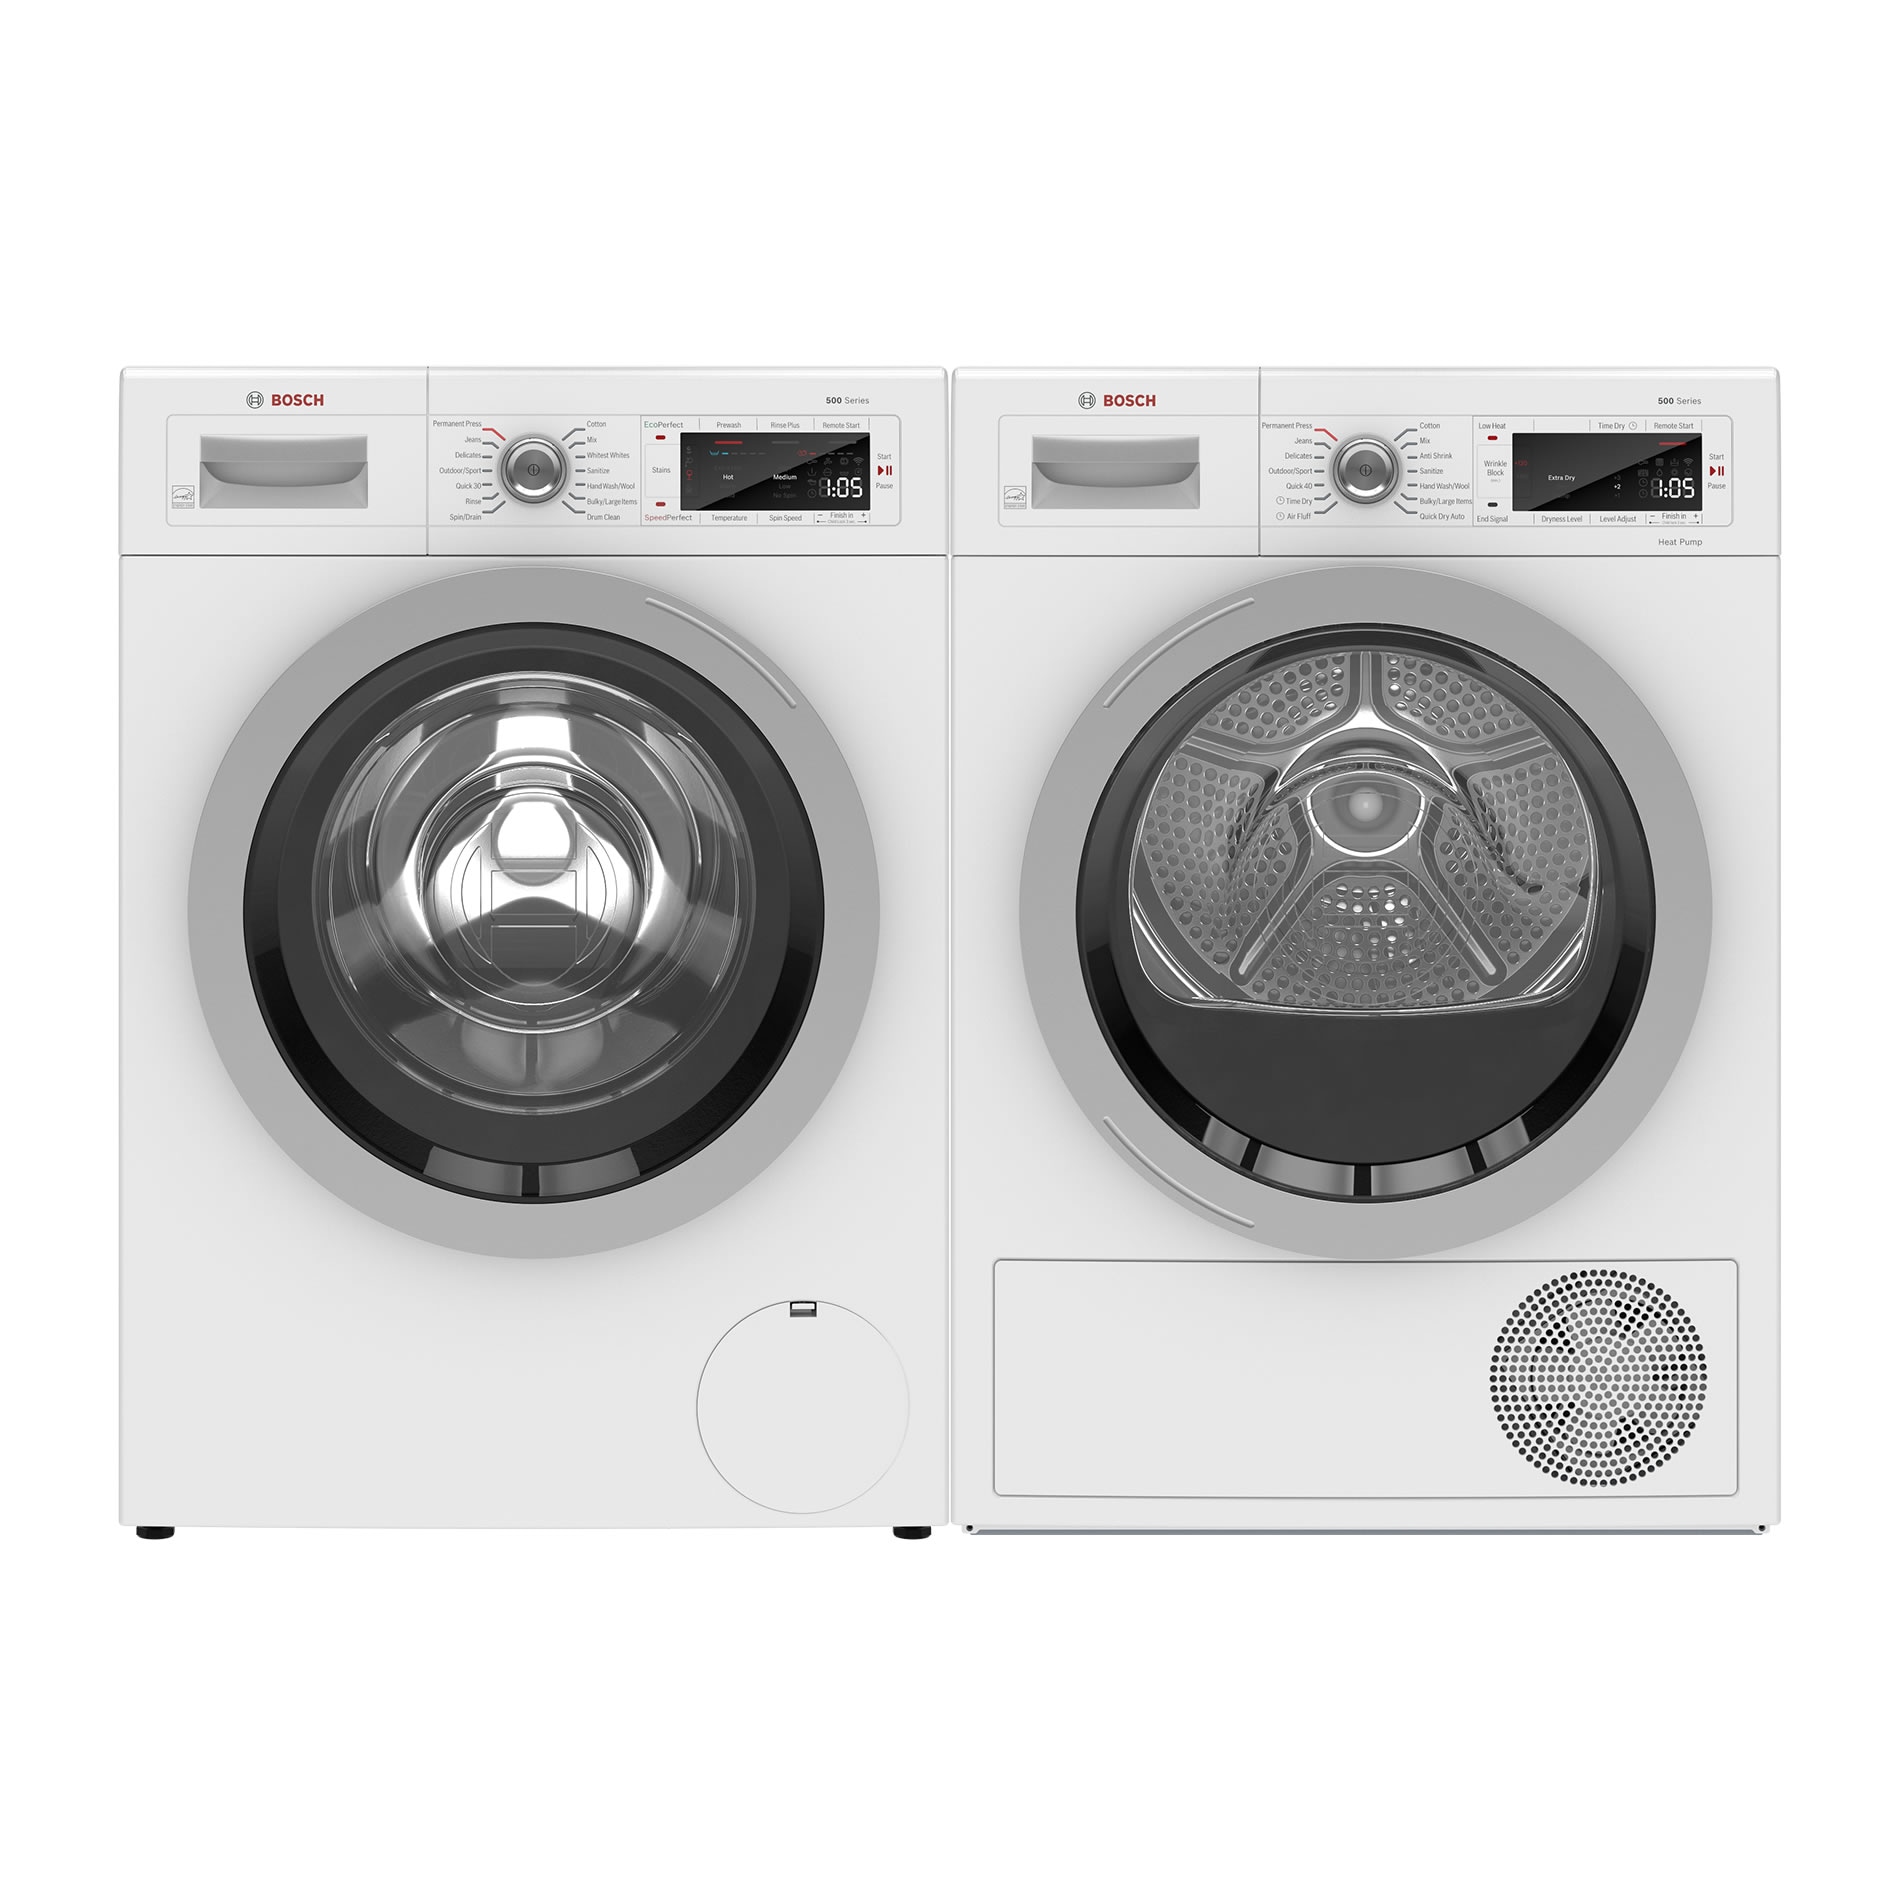  Compact Laundry Dryer, ROCSUMOO 110V Electric Compact Portable Clothes  Laundry Dryer with Stainless Steel Tub, Control Panel Downside Easy Control  for 4 Automatic Drying Mode, White : Appliances